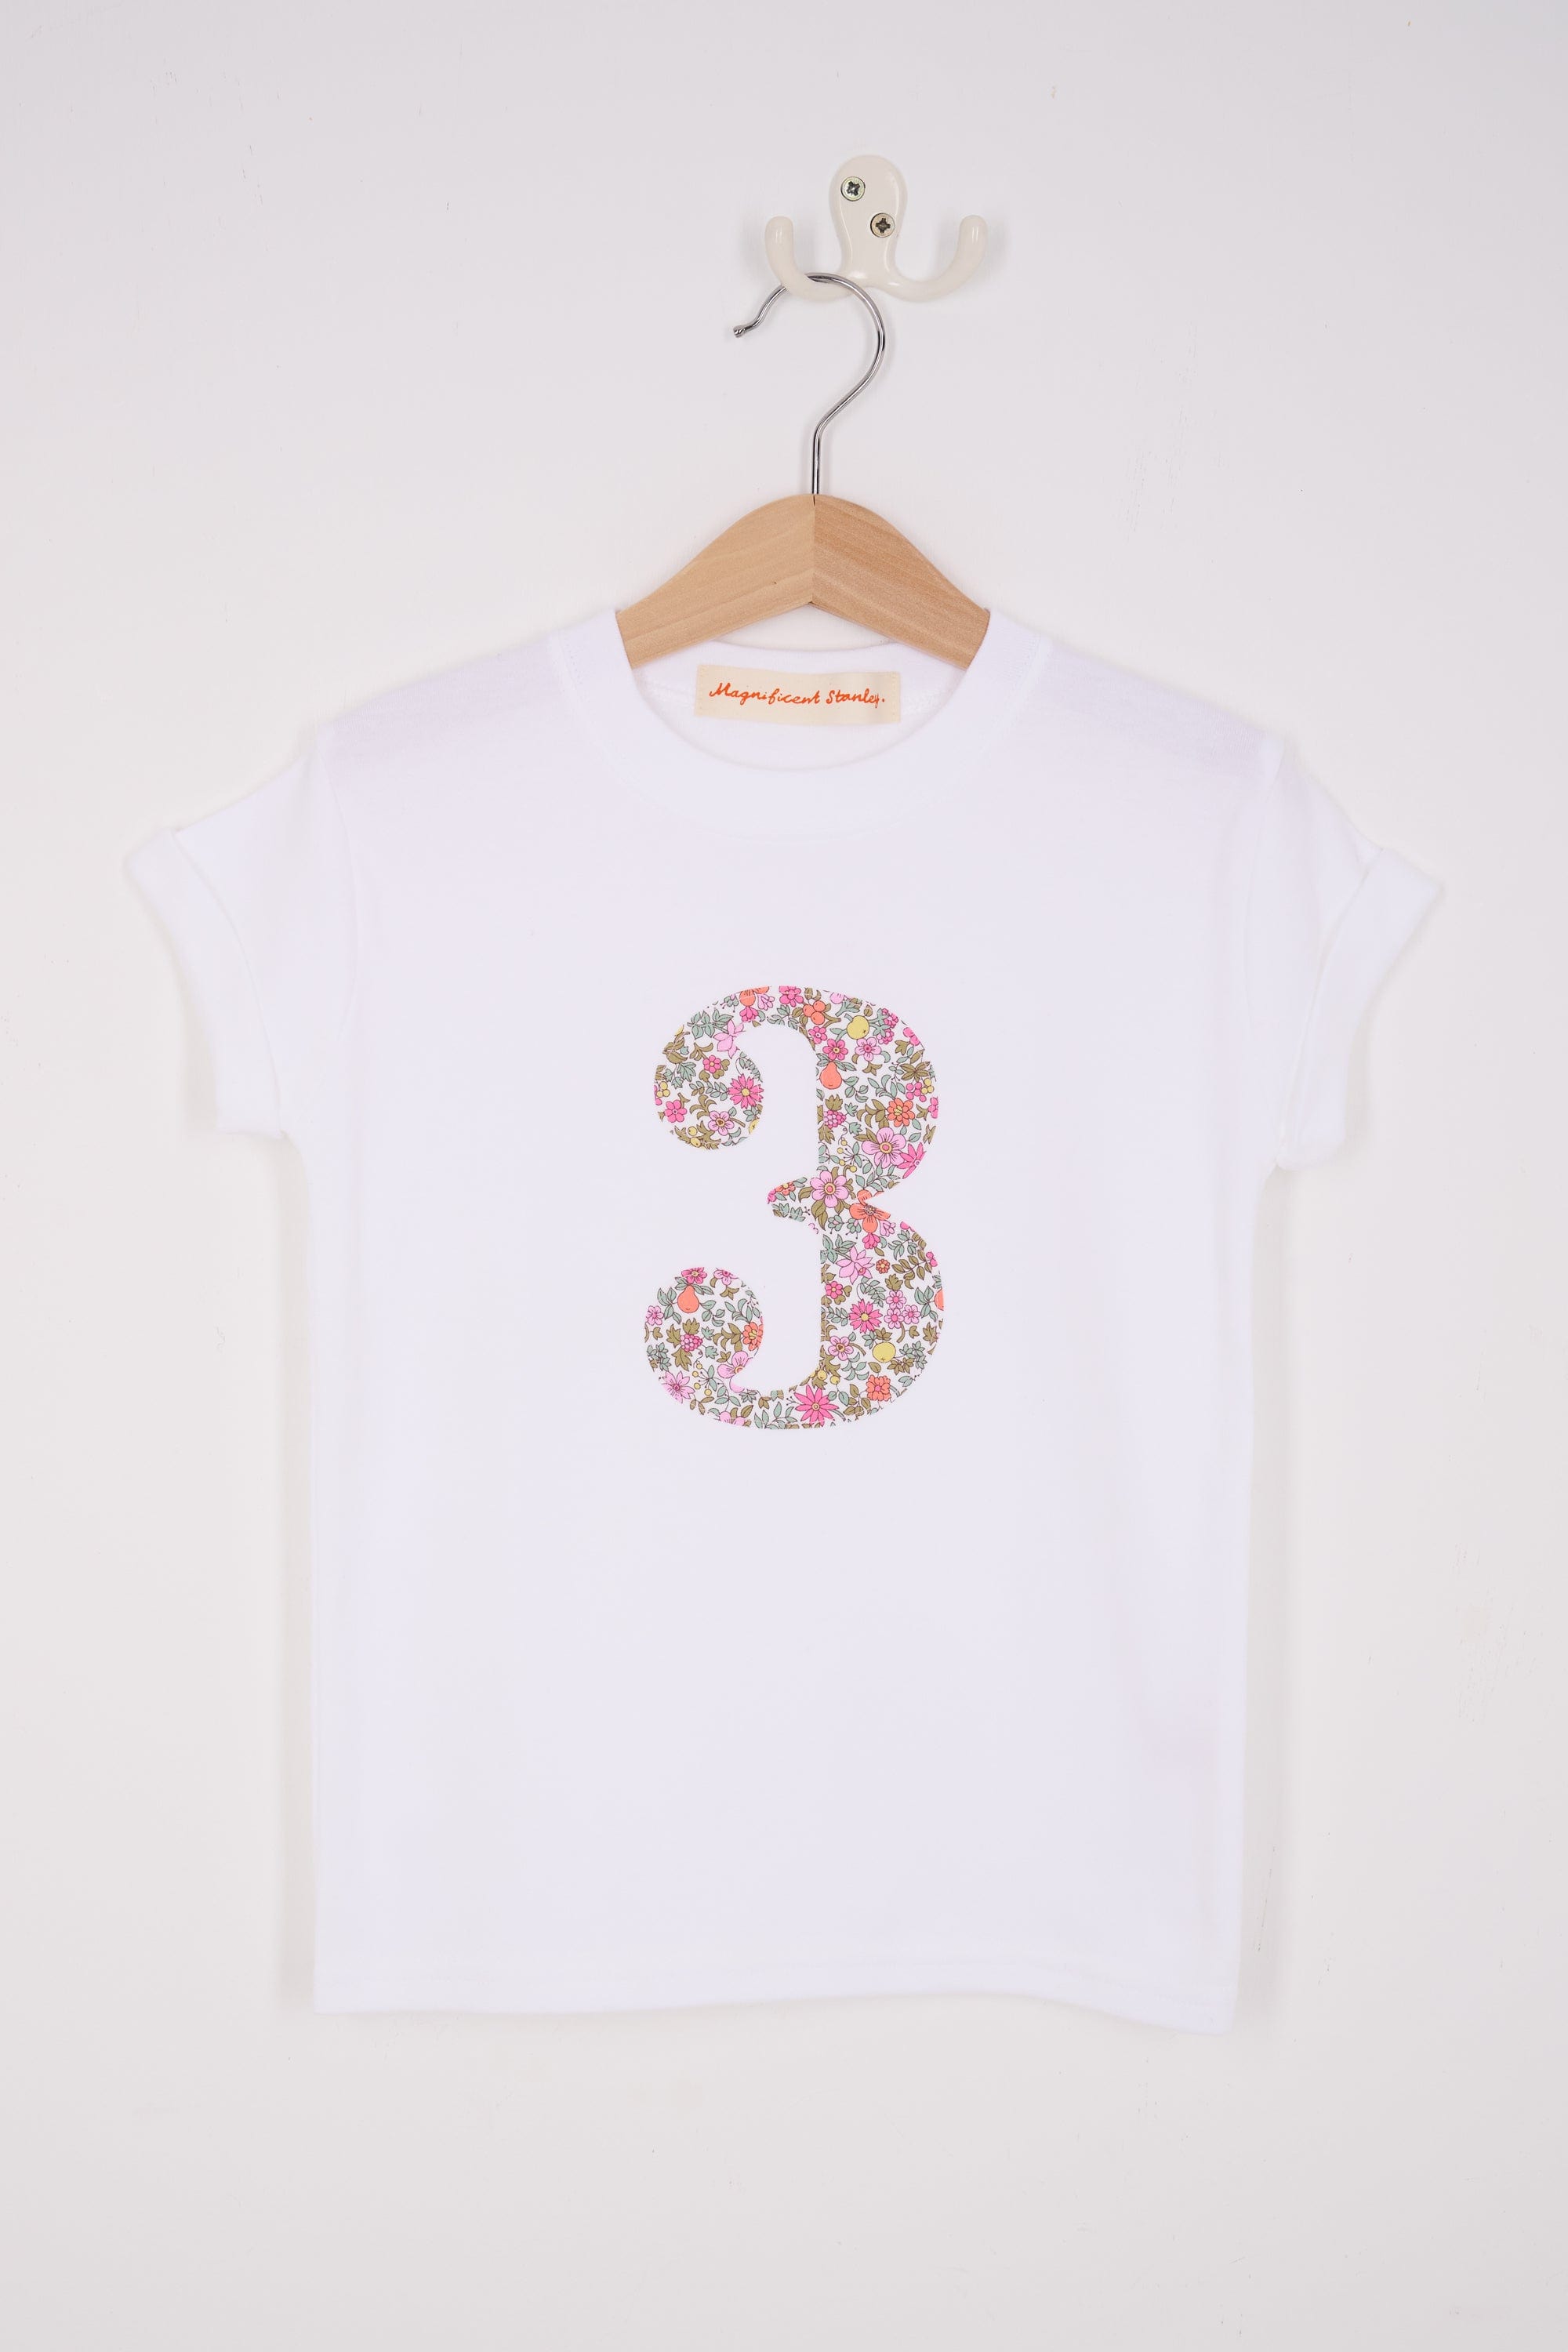 Magnificent Stanley Tee Number White T-Shirt in Fruit Punch Liberty Print